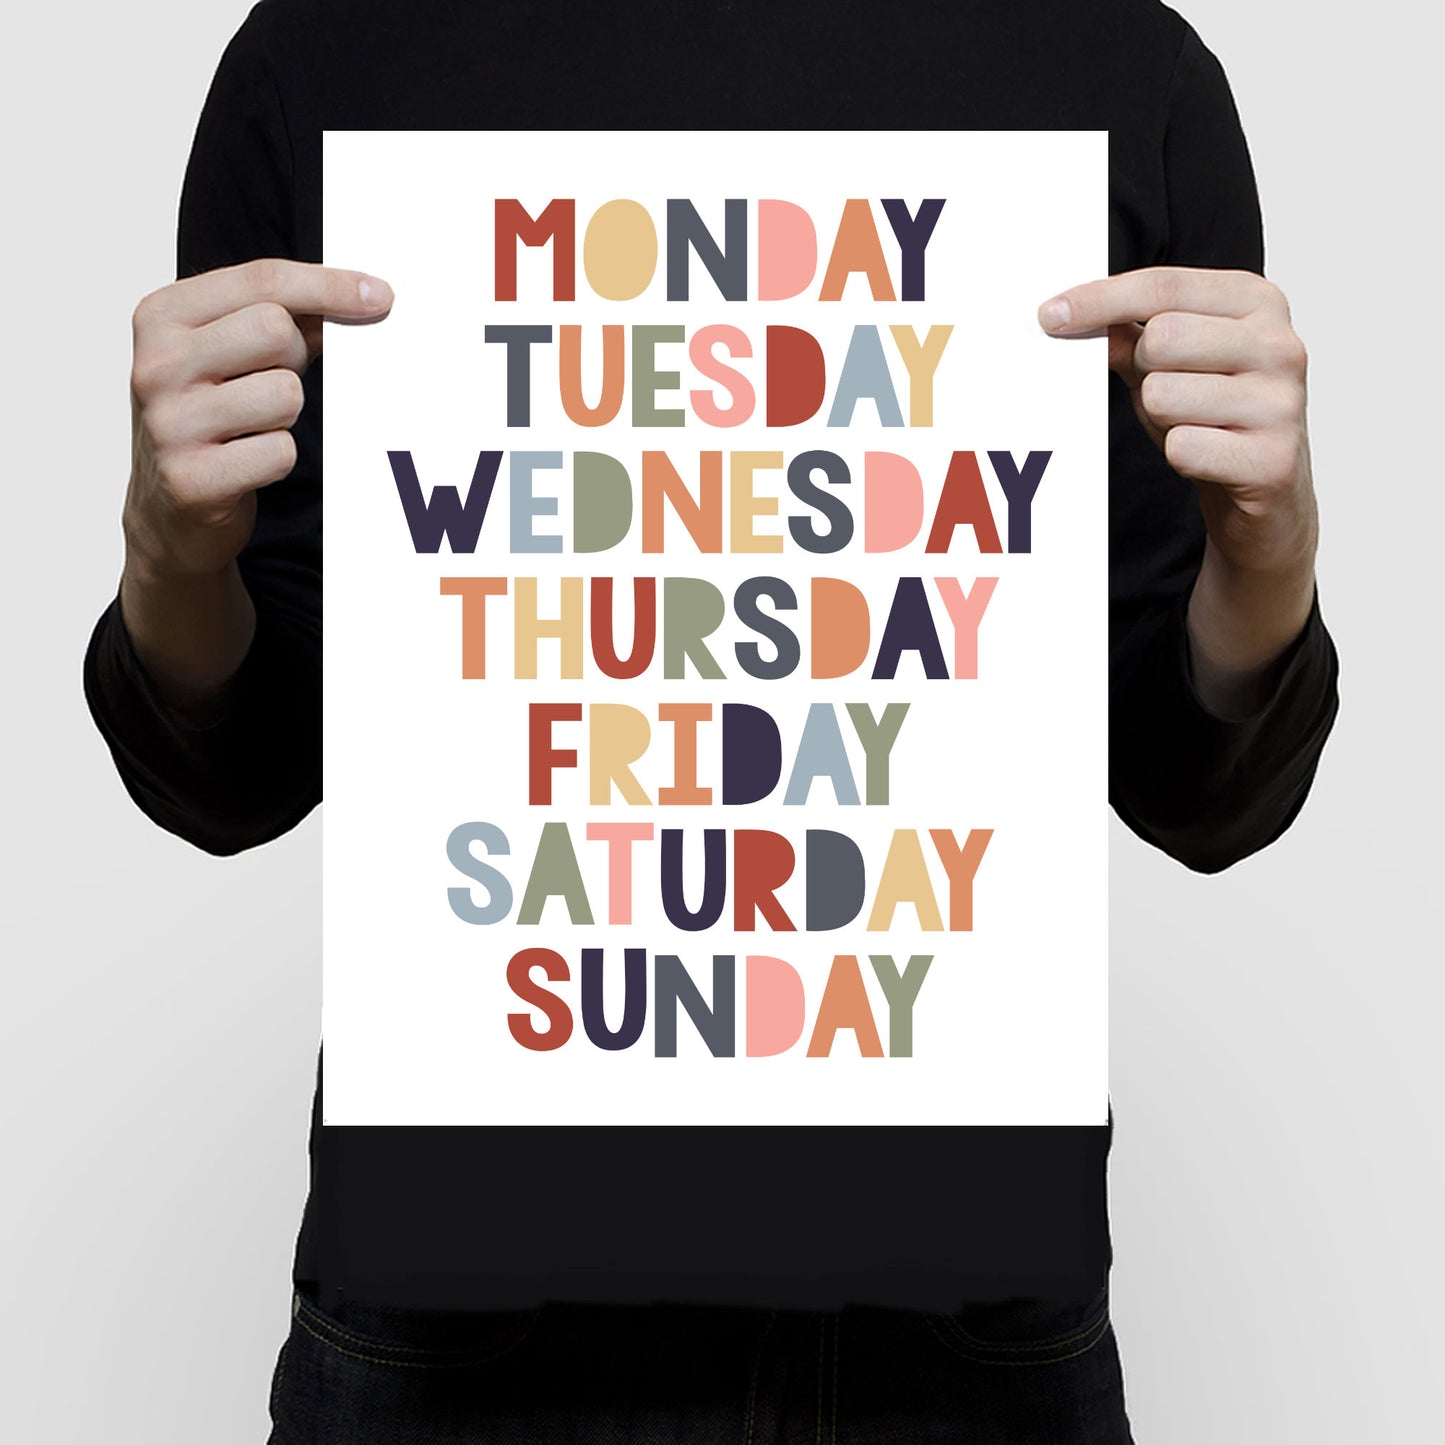 Days of the week in earth tones print